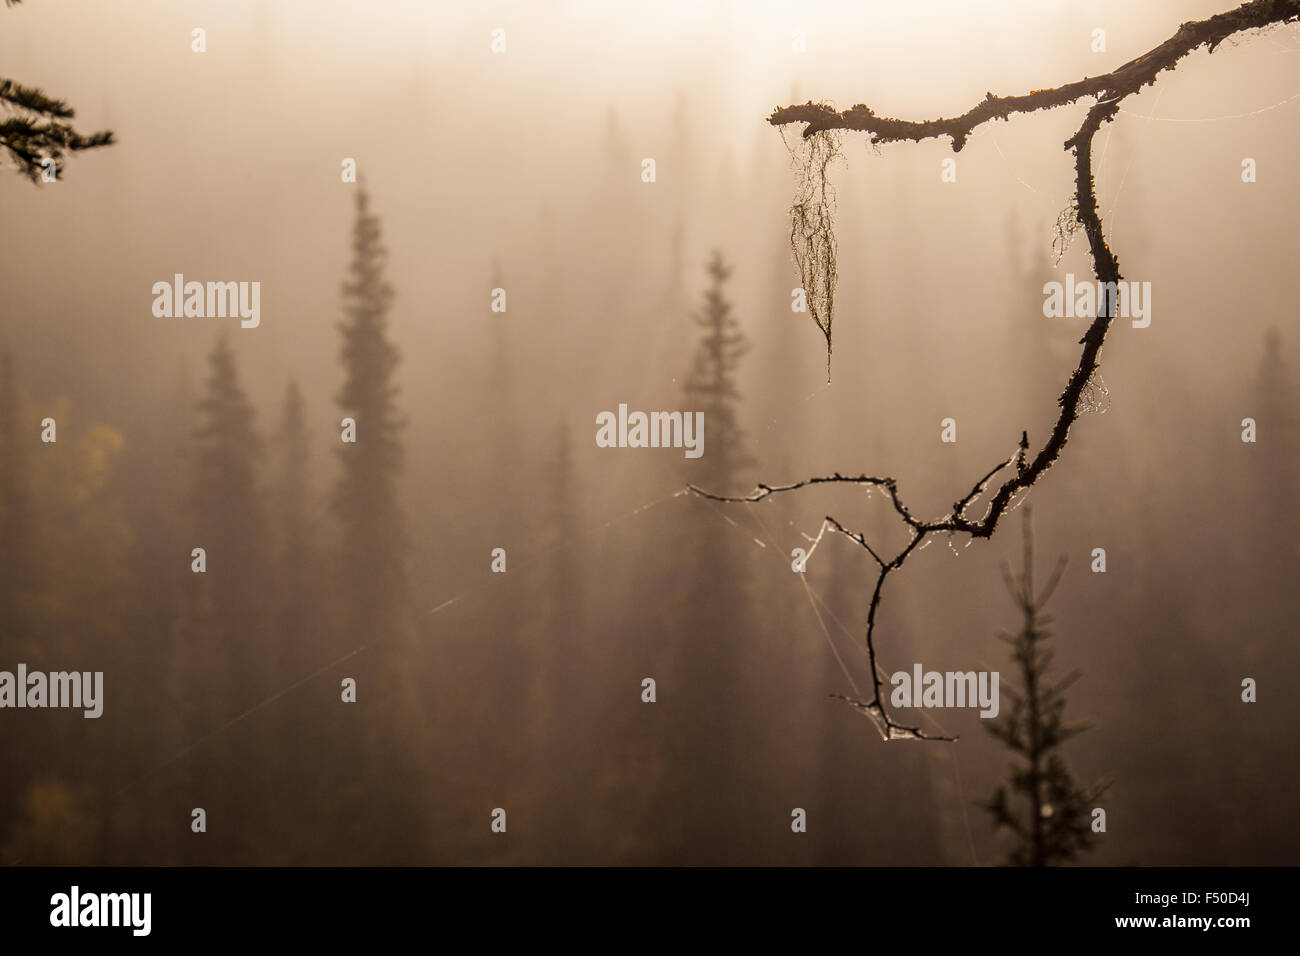 Foggy and surreal evergreens. Stock Photo